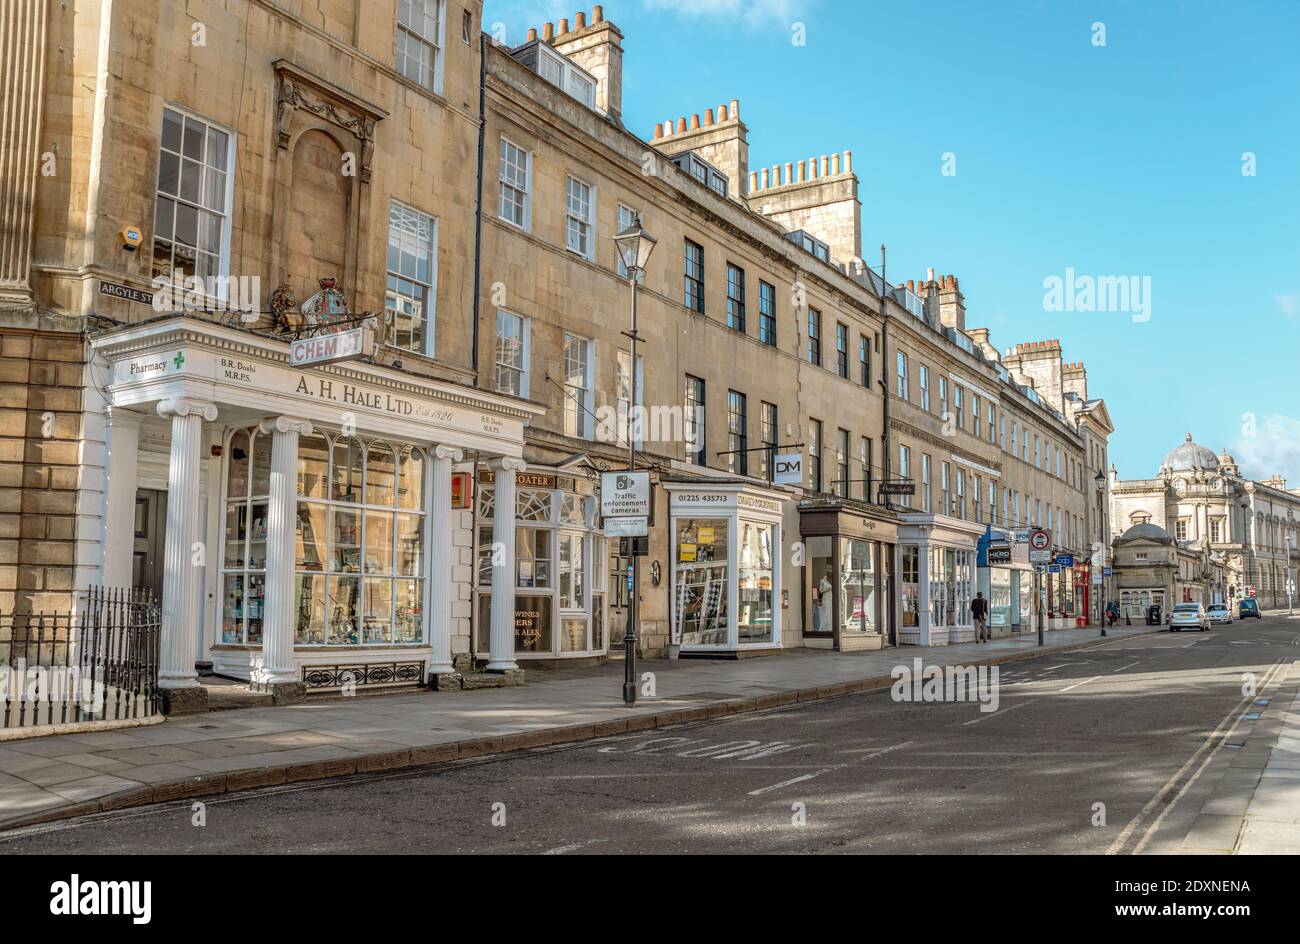 Shops in Argyle Street in the city center of Bath, Somerset, England Stock Photo